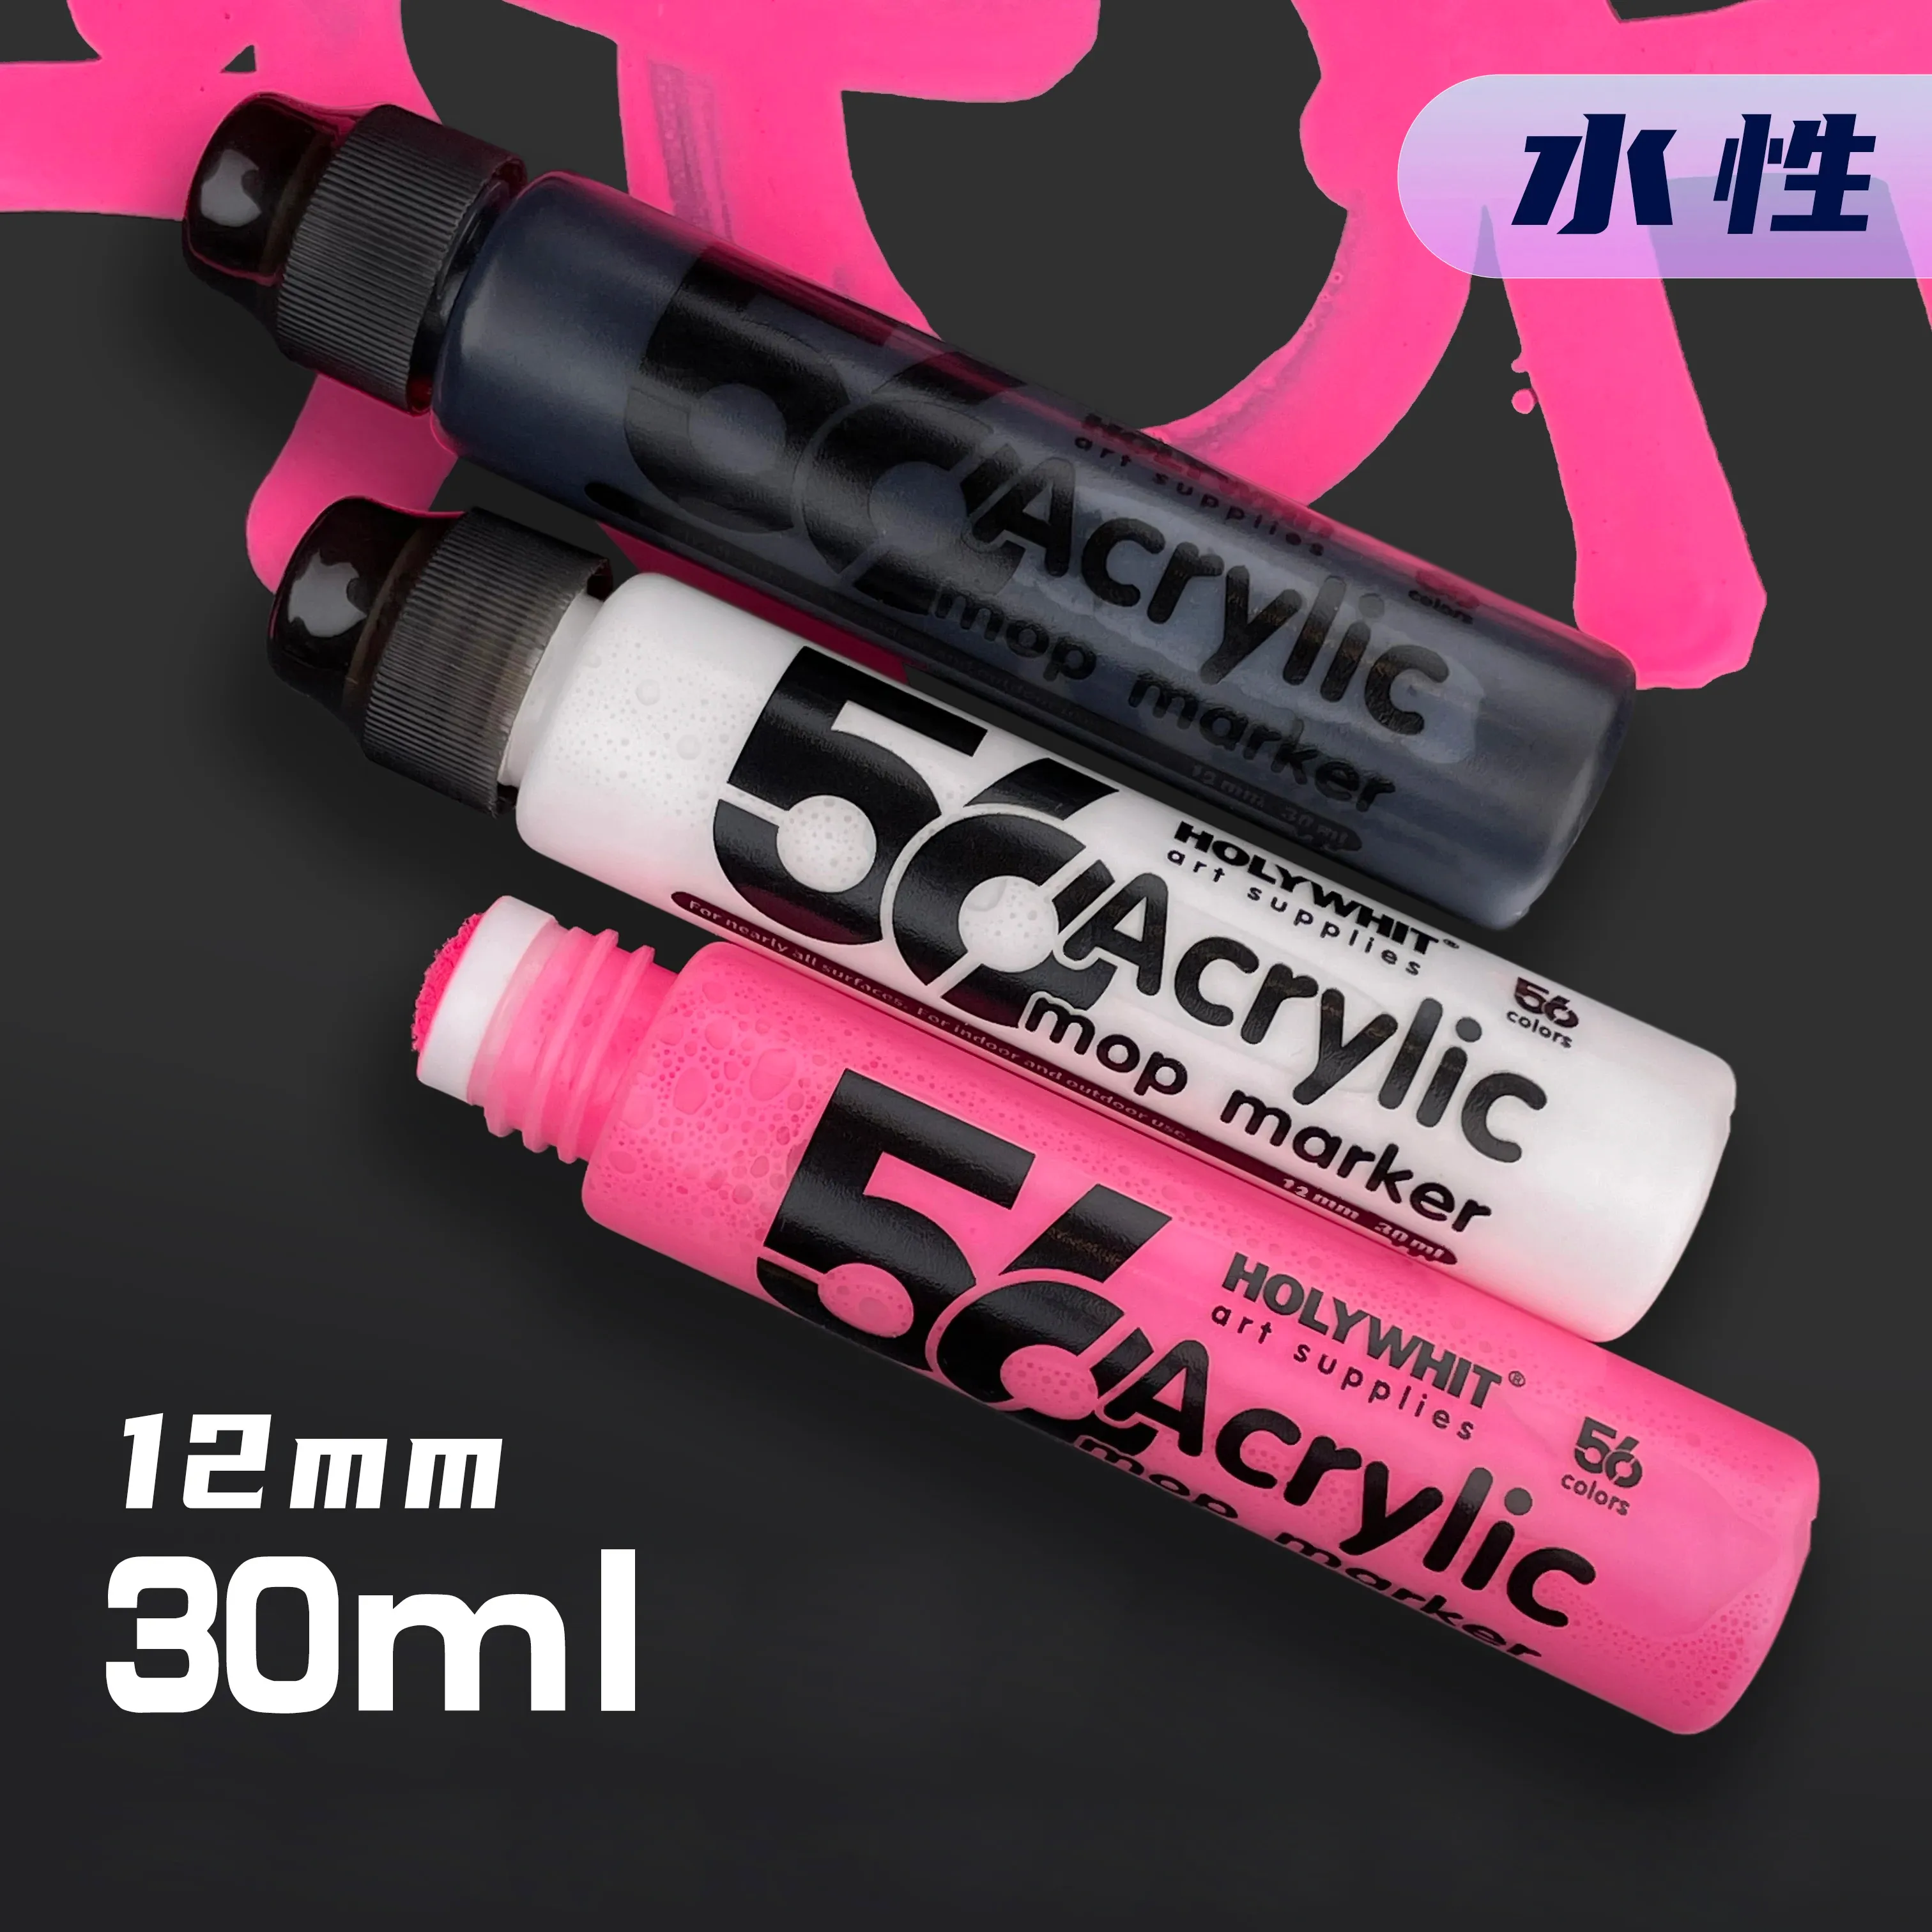 Markörer 12mm/30 ml Holywhit Waterborne Graffiti Markers Refillable Markers Pen Acrylic Paint Permanent Special Art Highlighter Pen